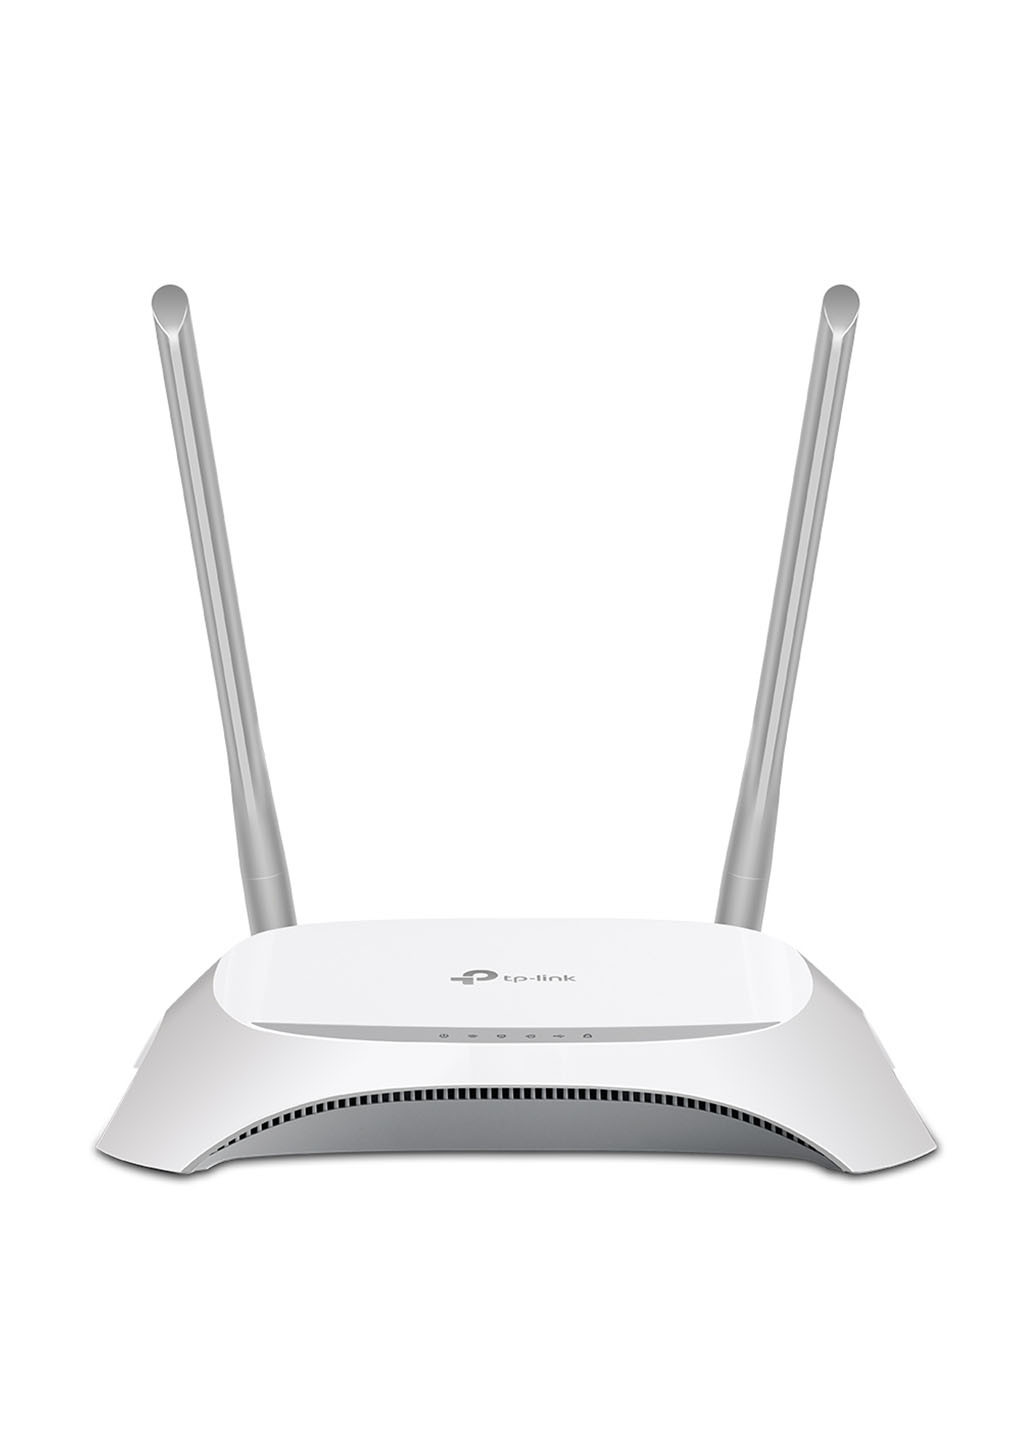 Маршрутизатор TL-WR842N TP-Link маршрутизатор tp-link tl-wr842n (130280716)